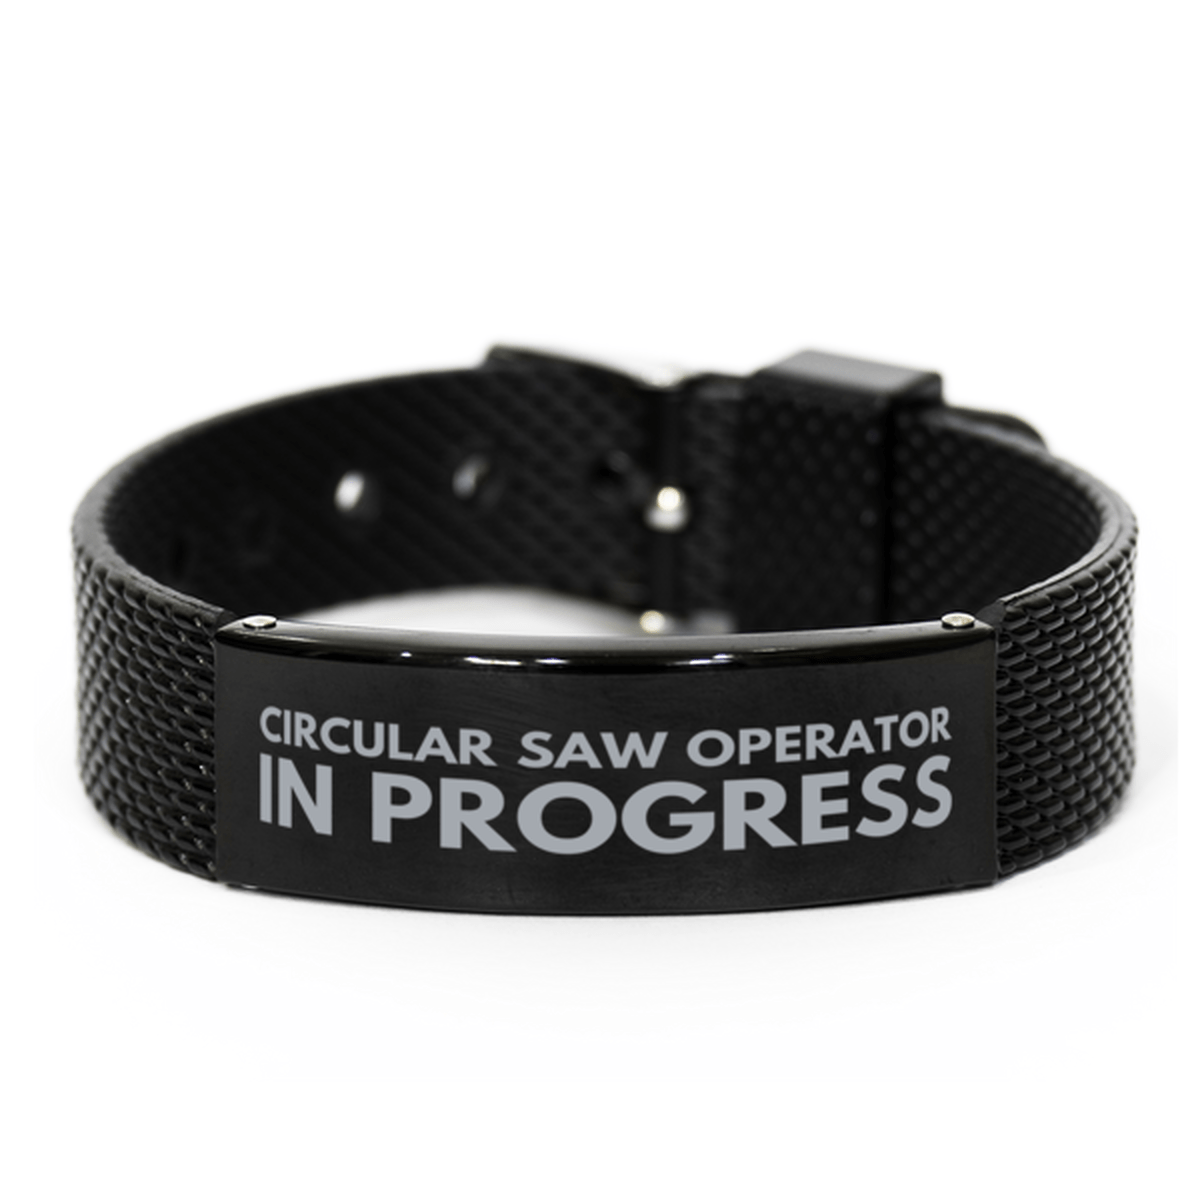 Inspirational Circular Saw Operator Black Shark Mesh Bracelet, Circular Saw Operator In Progress, Best Graduation Gifts for Students